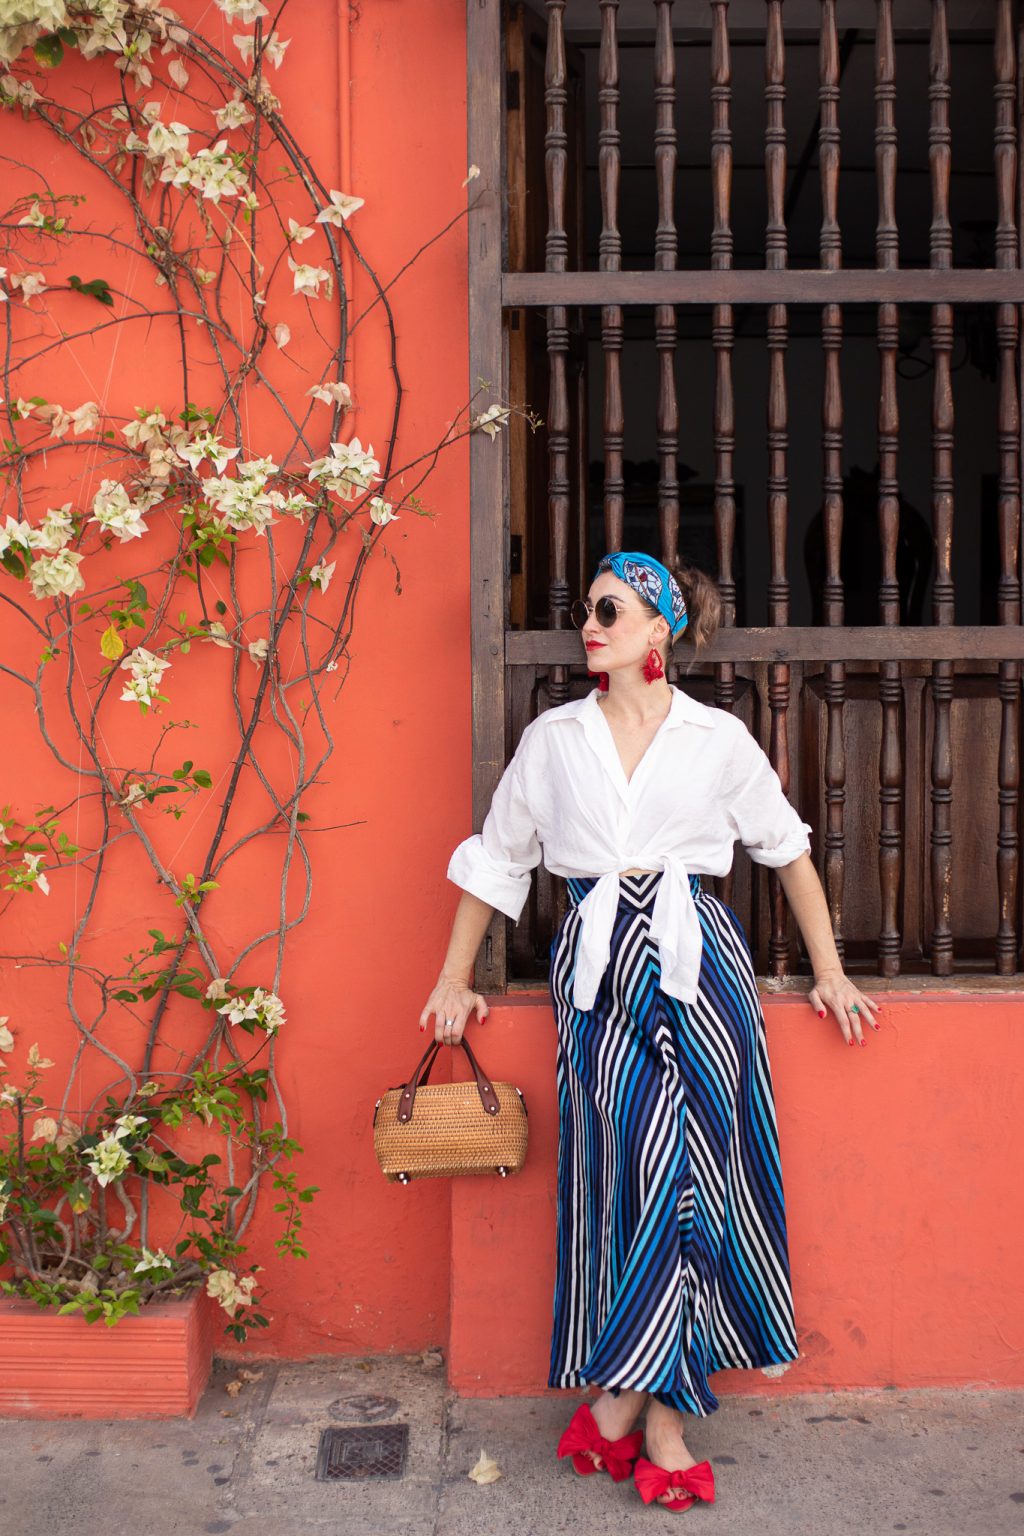 6 Most Instagrammable Places In Cartagena + Photo Tips | Blog